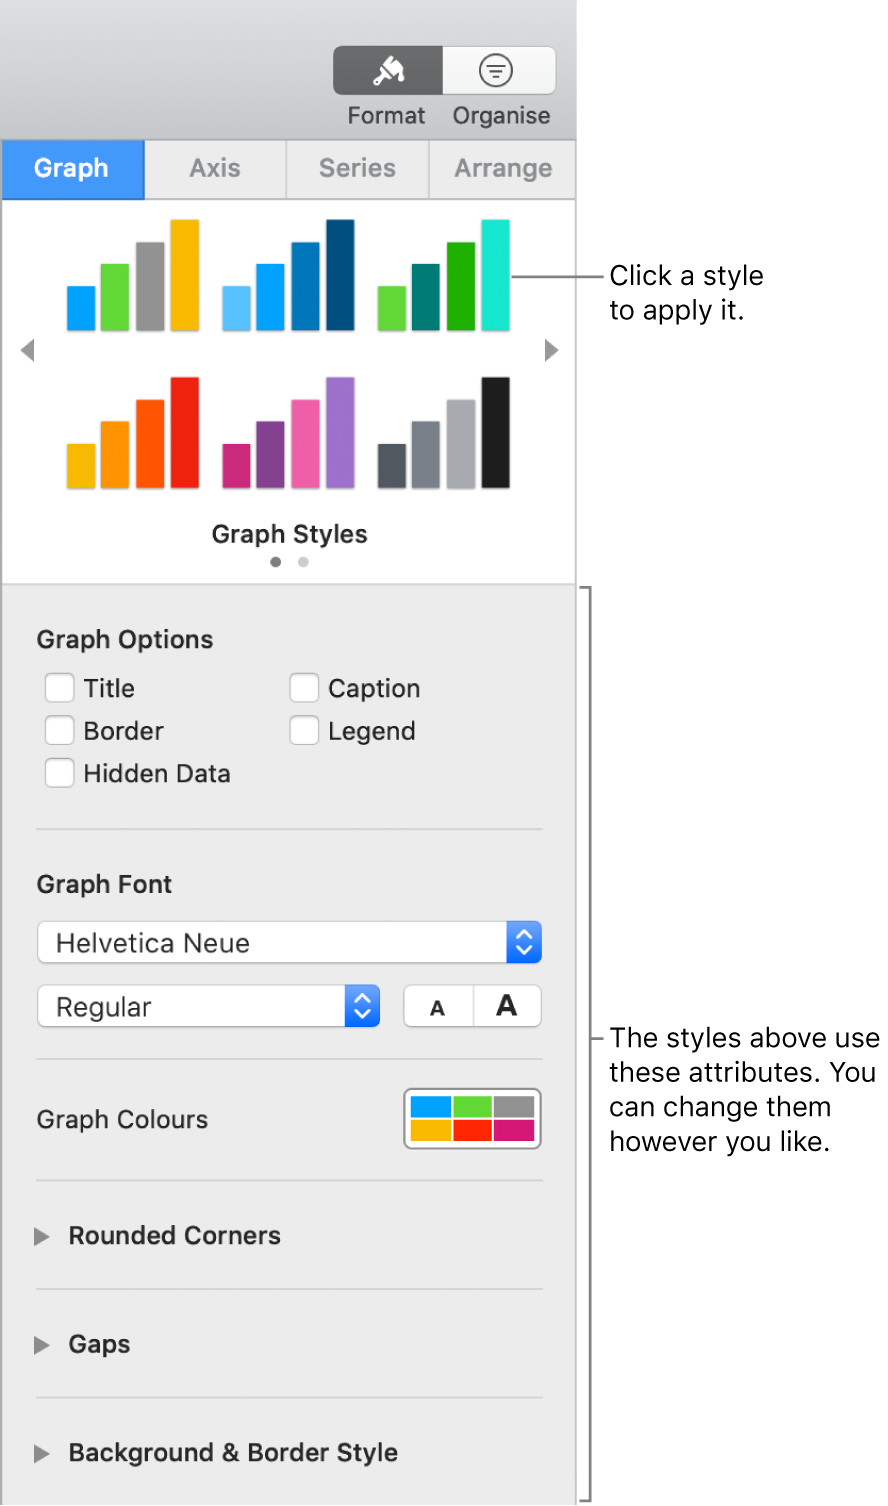 The Formatting sidebar showing the controls for formatting graphs.